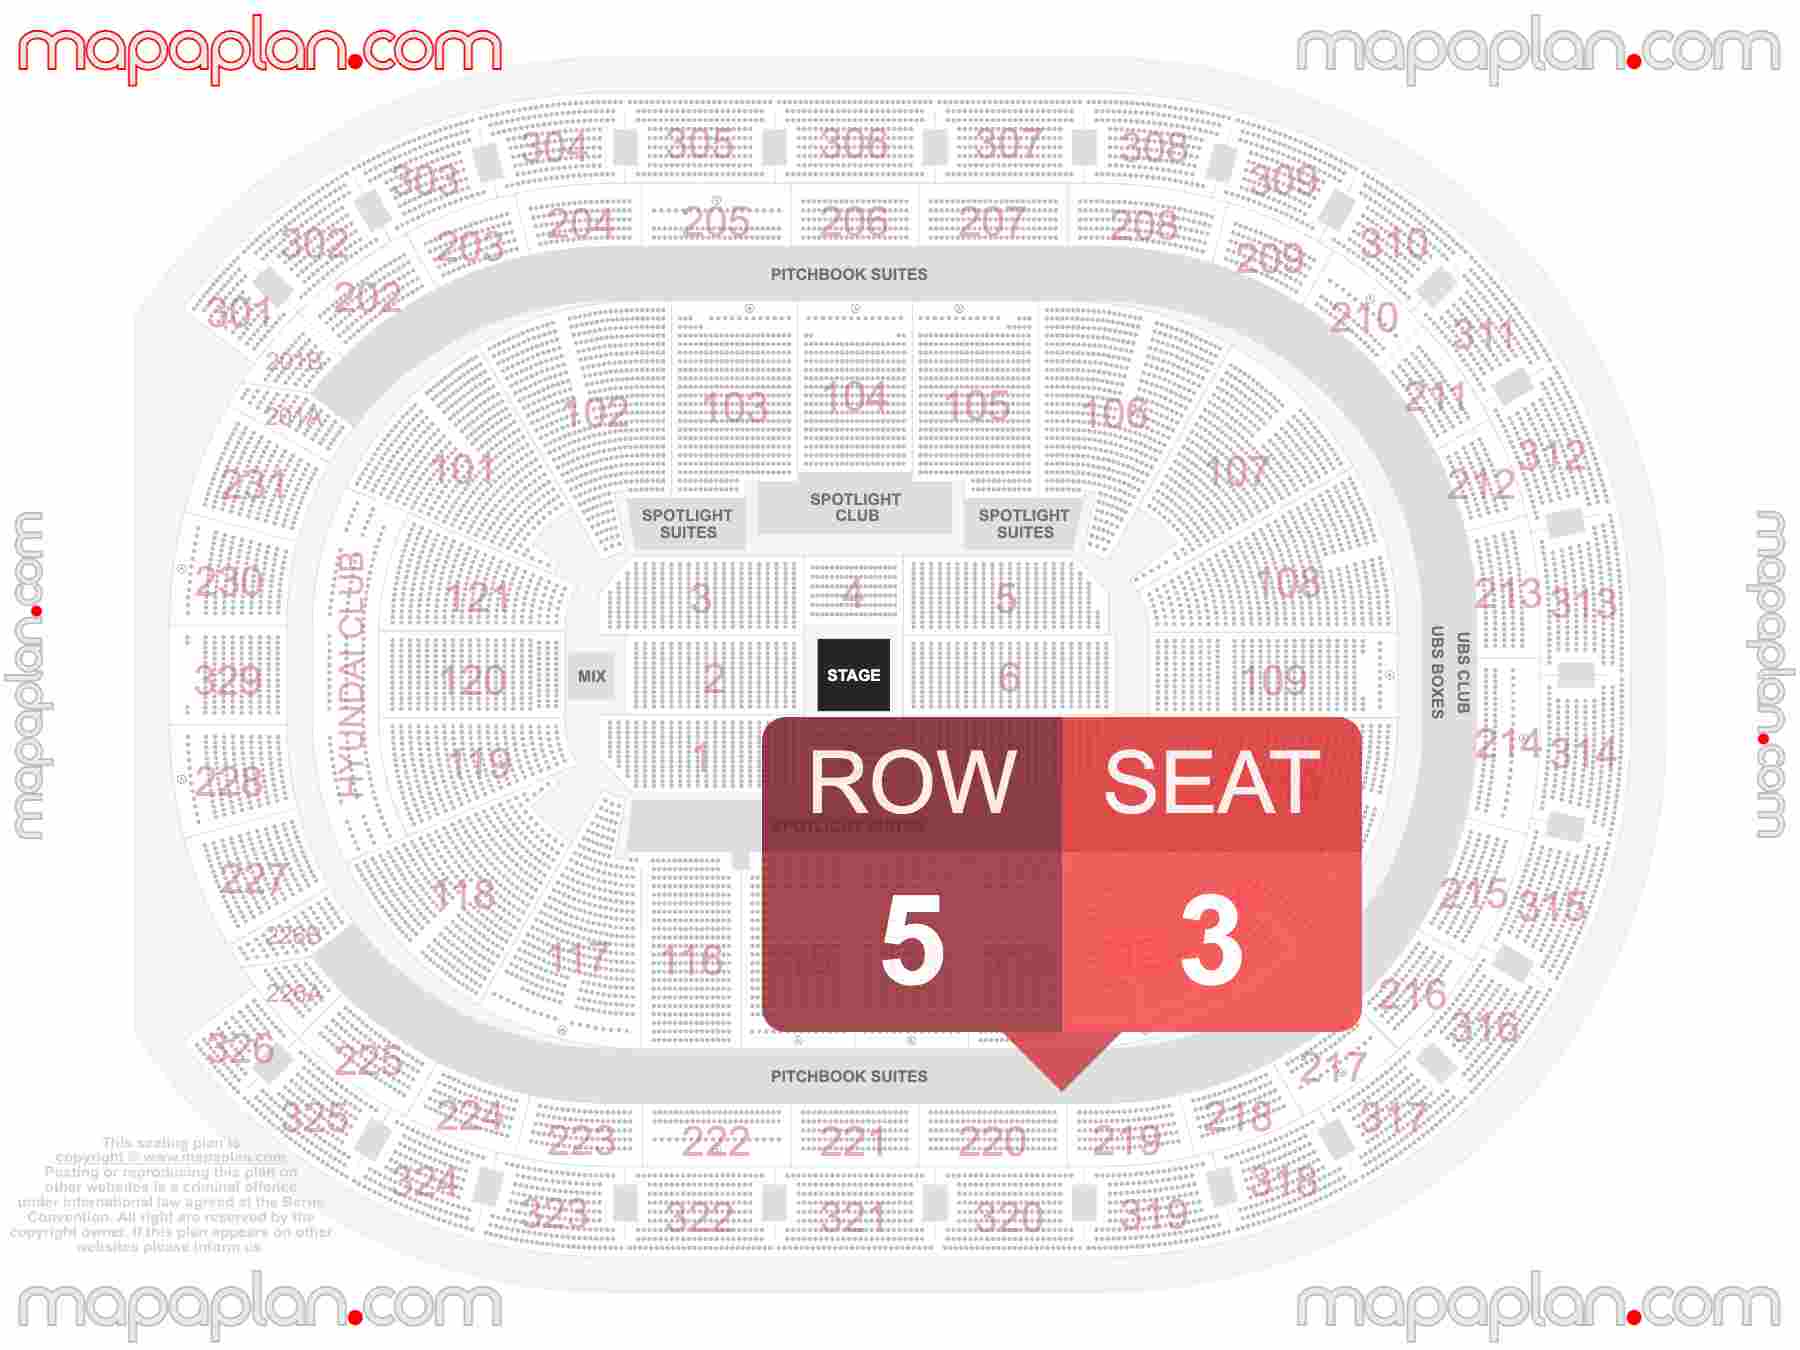 Belmont Park Elmont UBS Arena seating chart Concert 360 in the round stage find best seats row numbering system plan showing how many seats per row - Individual 'find my seat' virtual locator